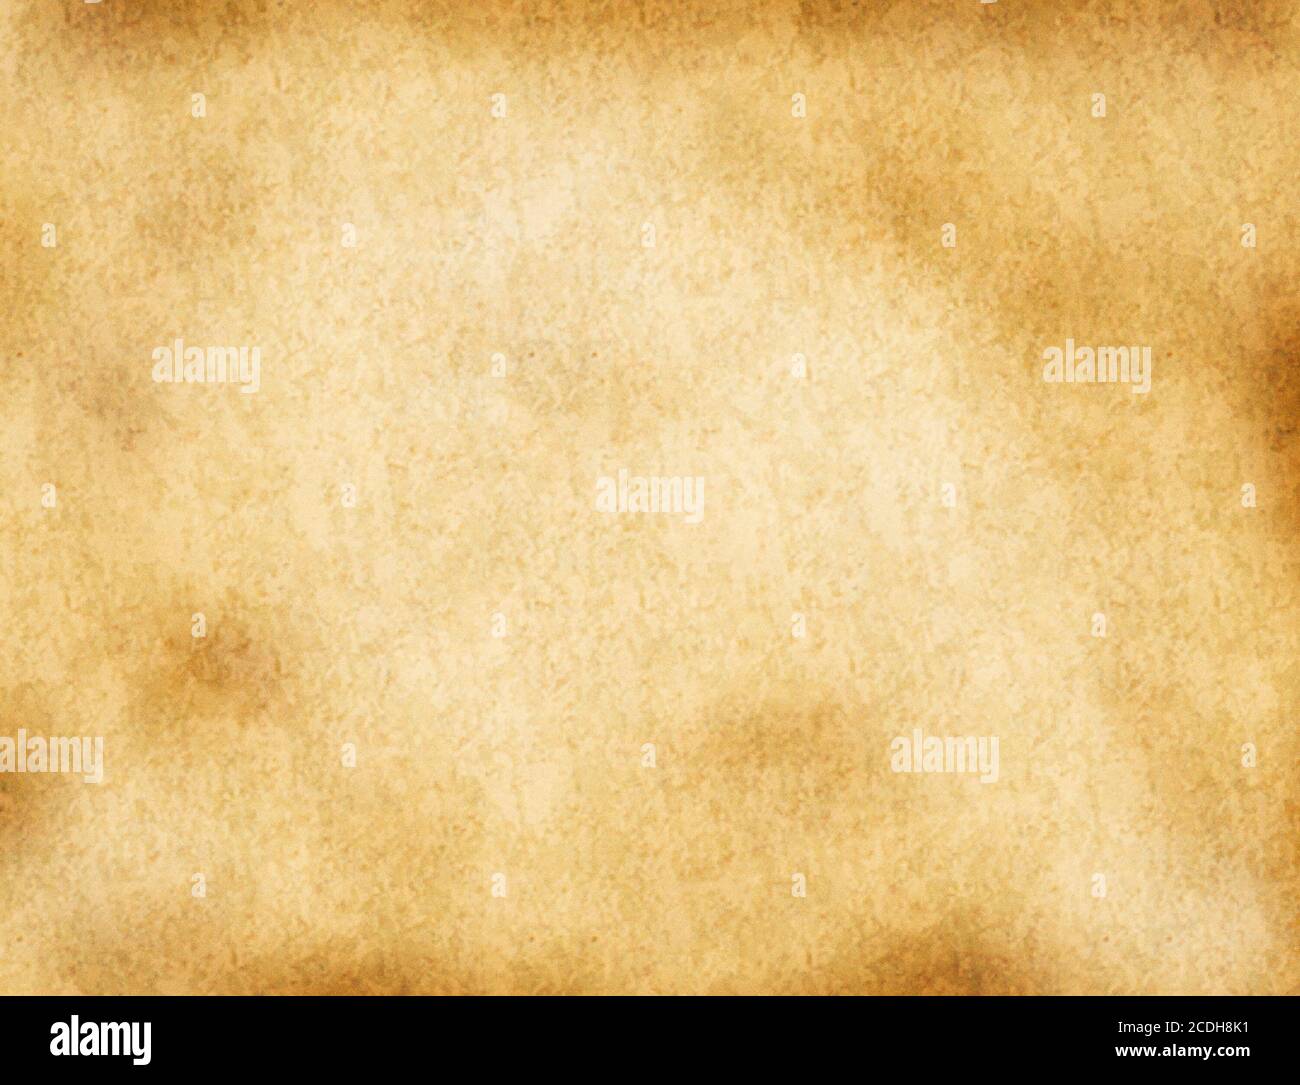 old paper texture Stock Photo